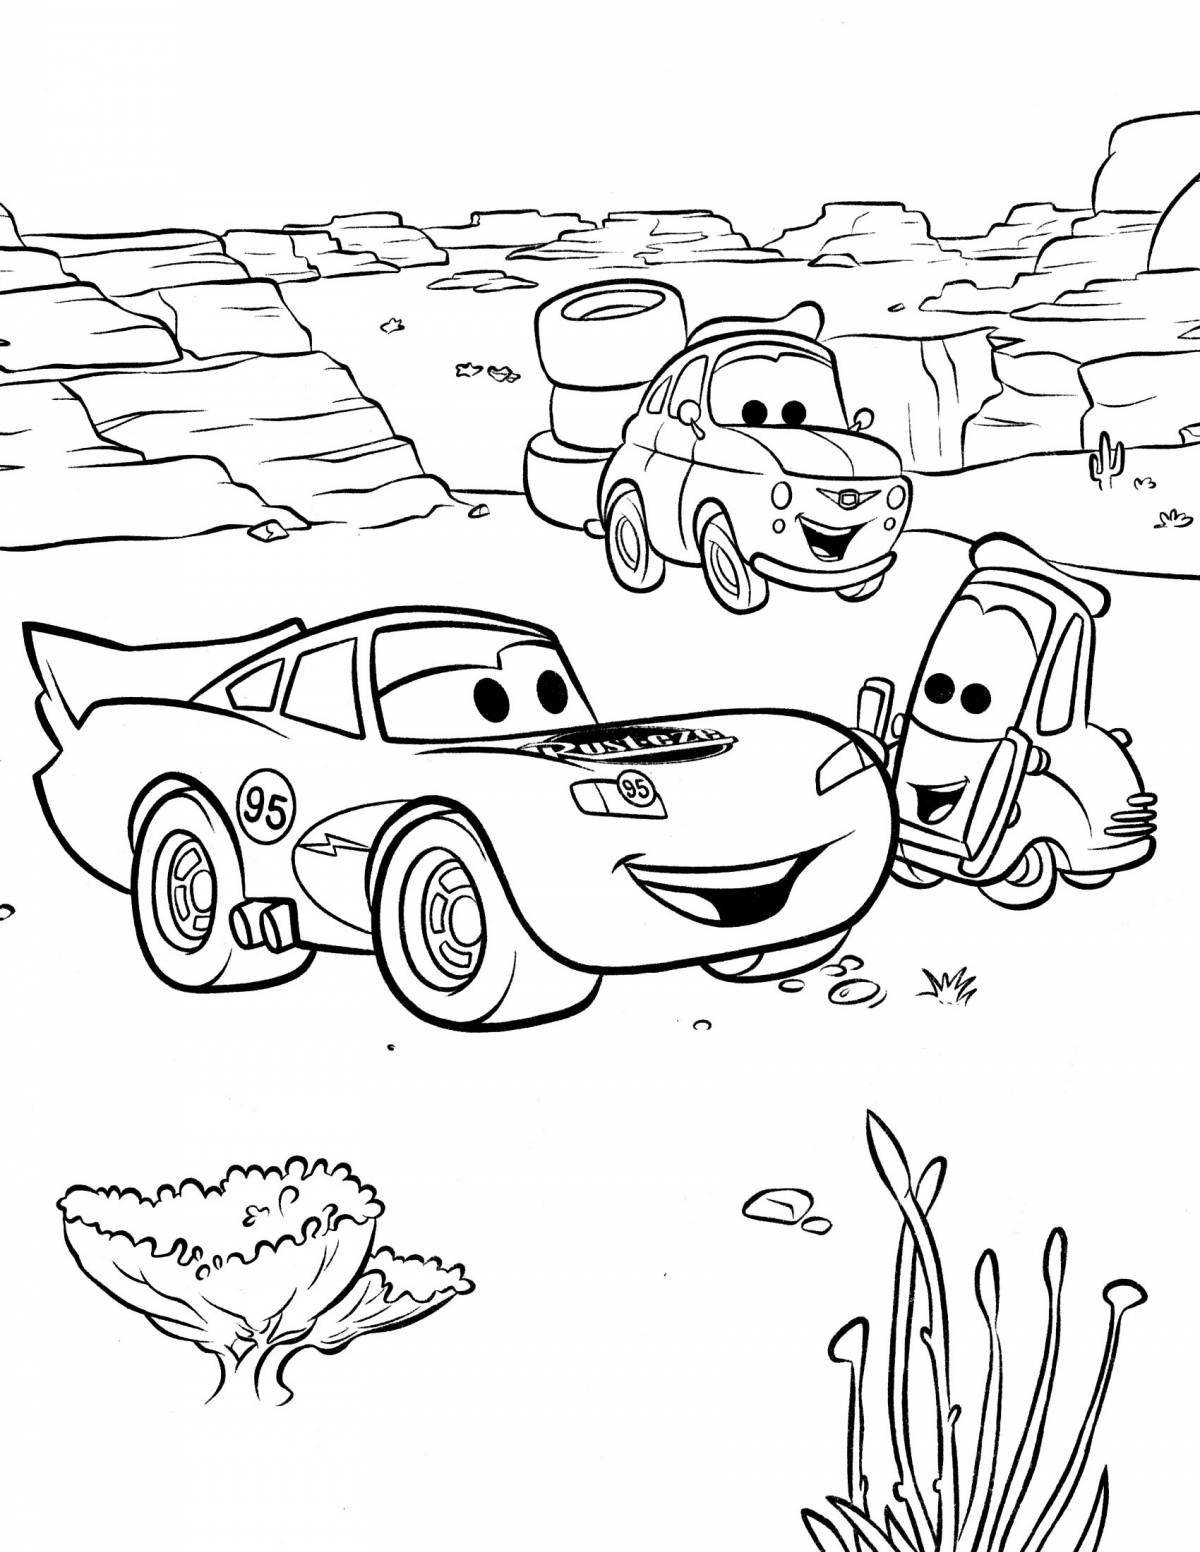 Lightning mcqueen's car coloring pages